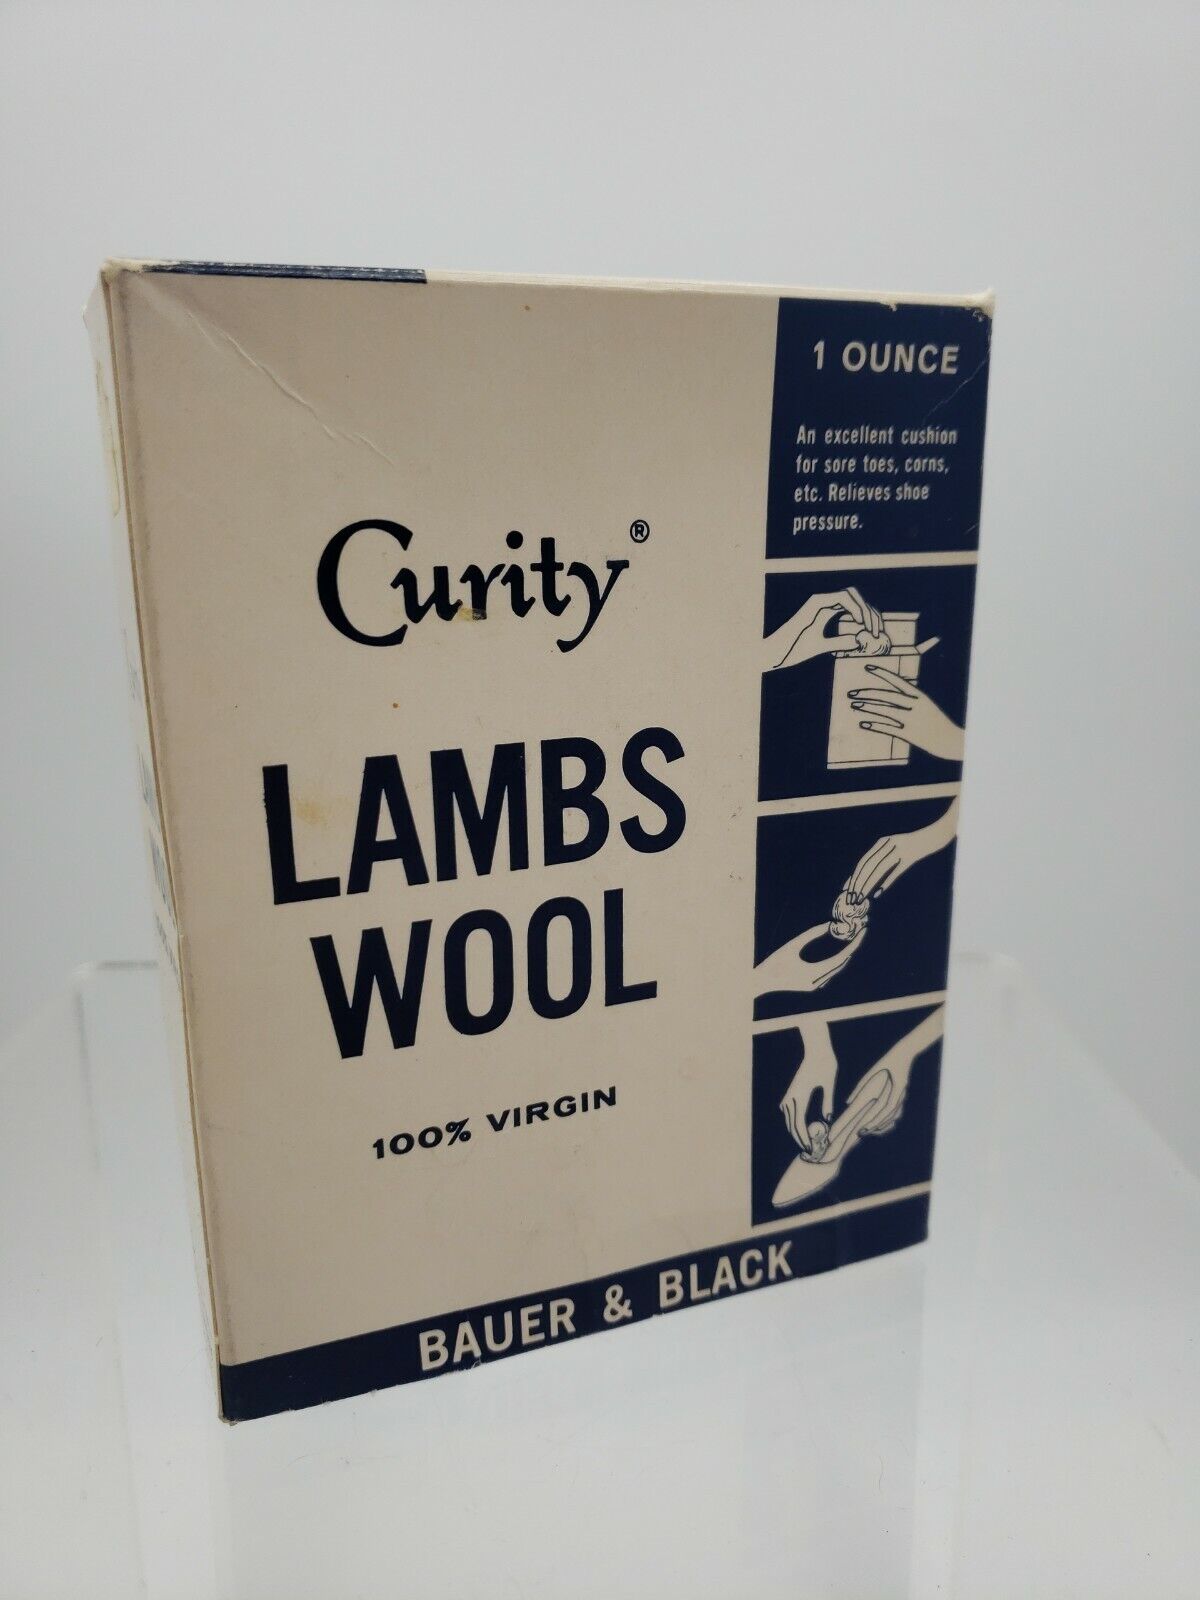 Vintage Curity Lambs Wool Empty Box Apothecary Collectibles